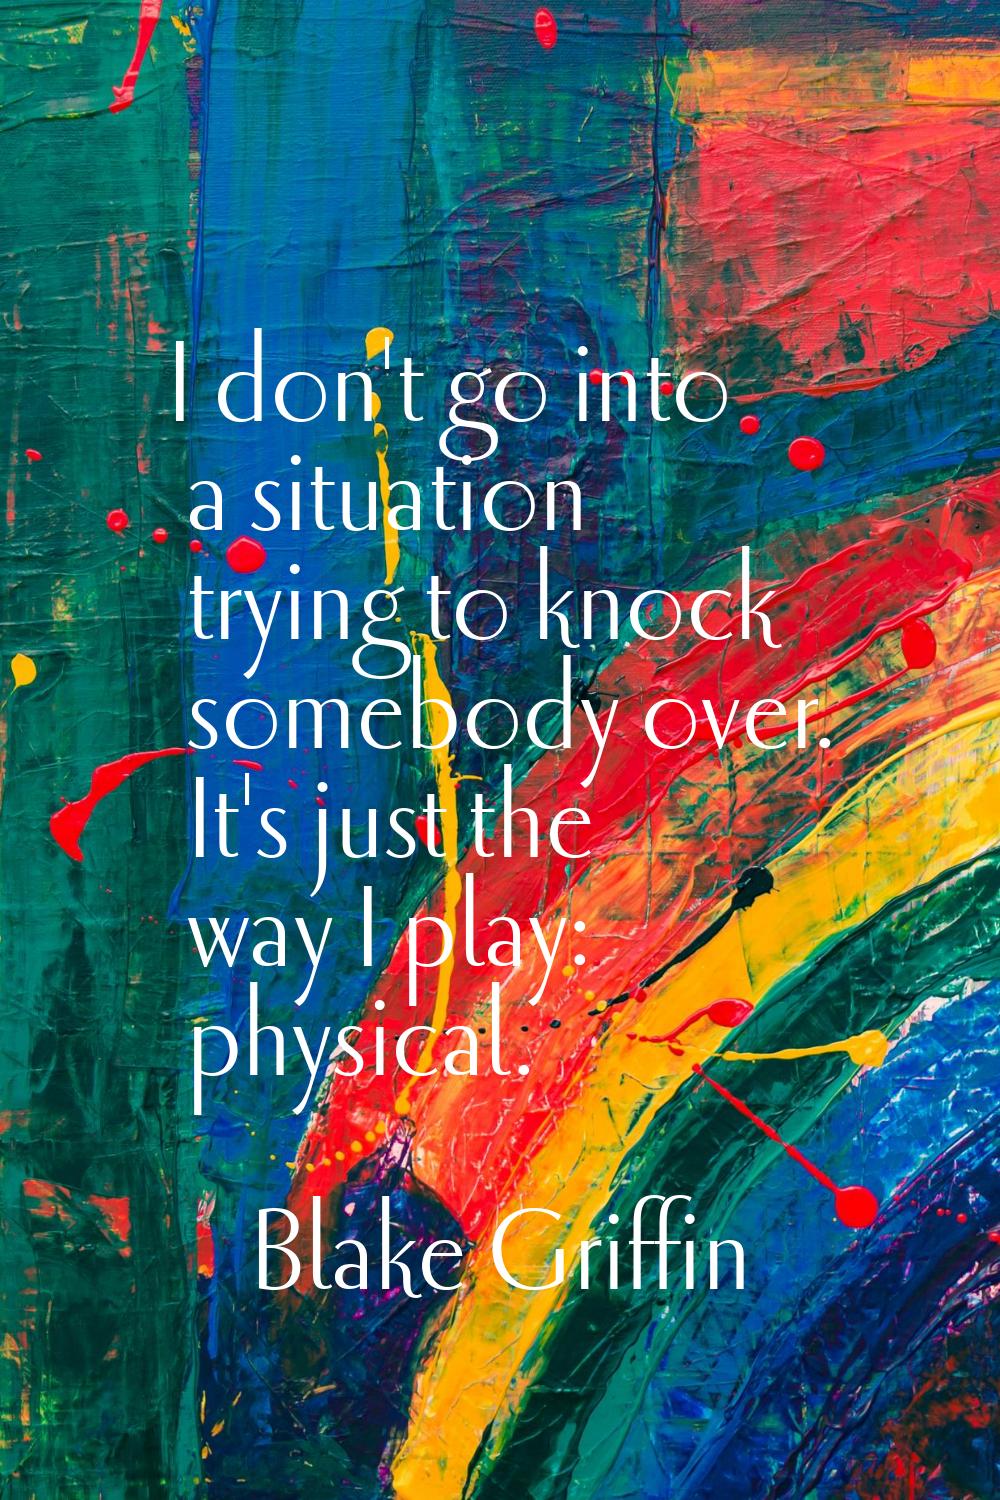 I don't go into a situation trying to knock somebody over. It's just the way I play: physical.